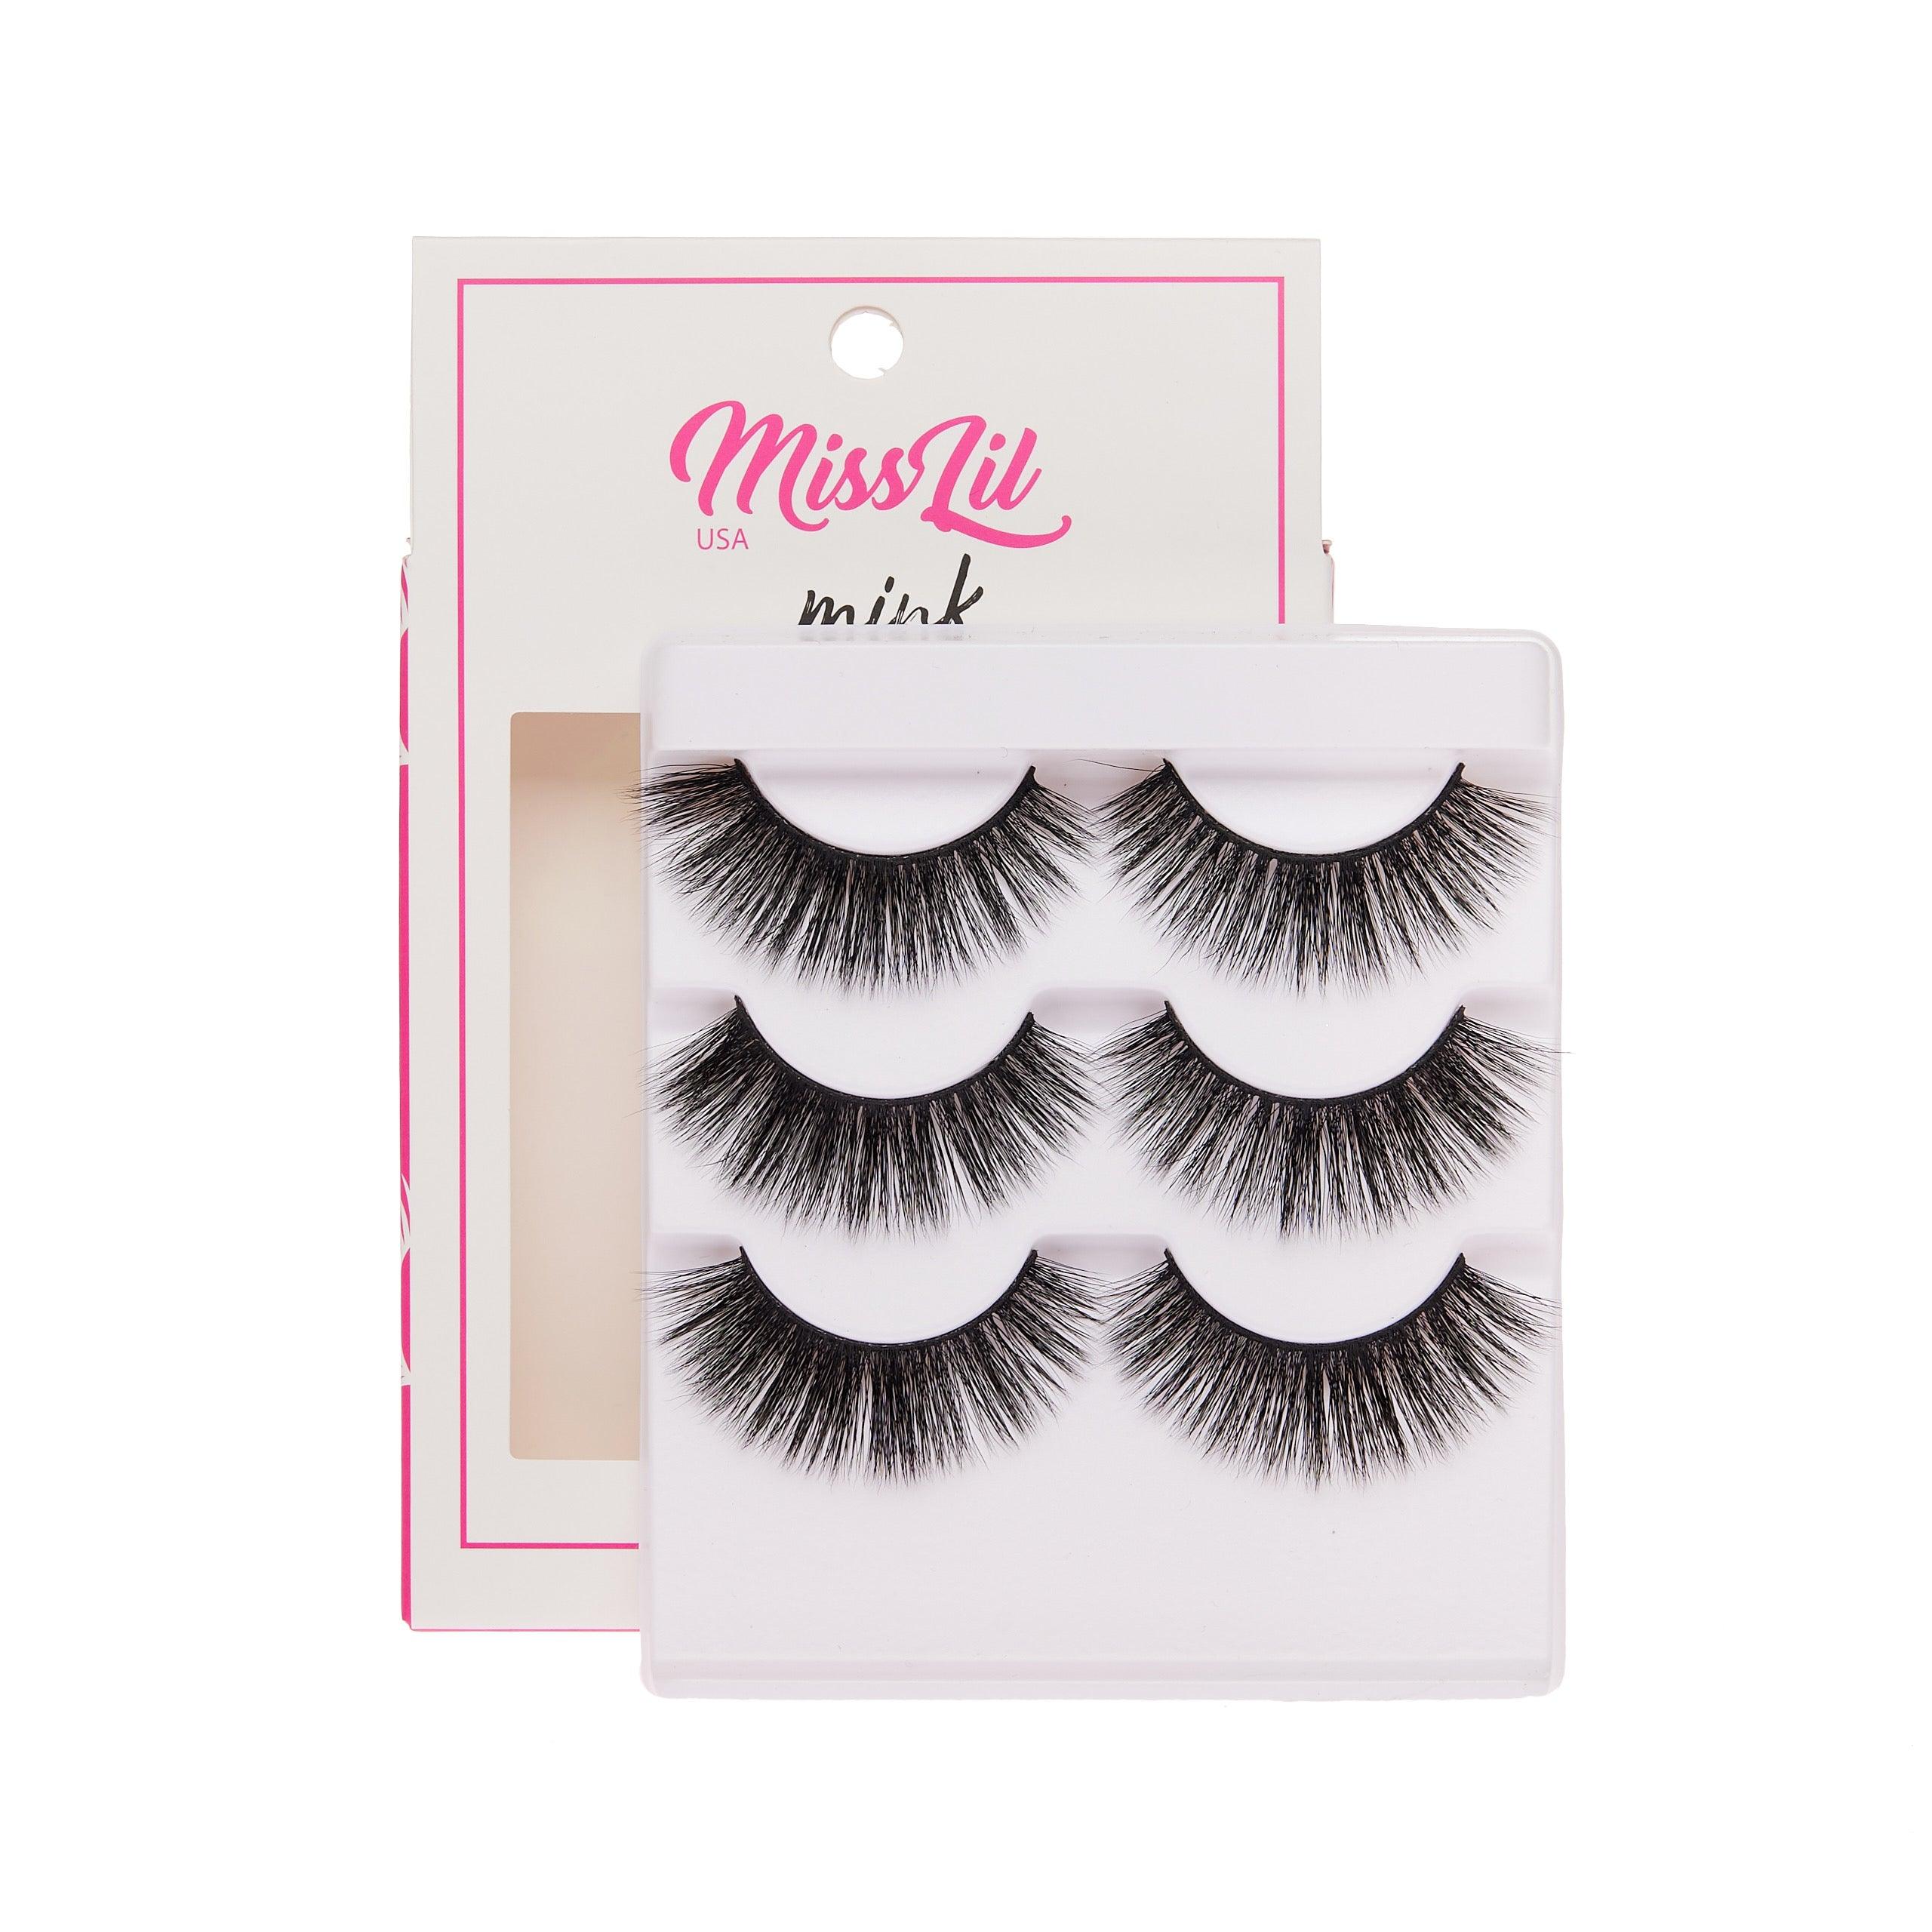 3-Pair Faux Mink Effect Lashes - Lash Party Collection #11 - Pack of 3